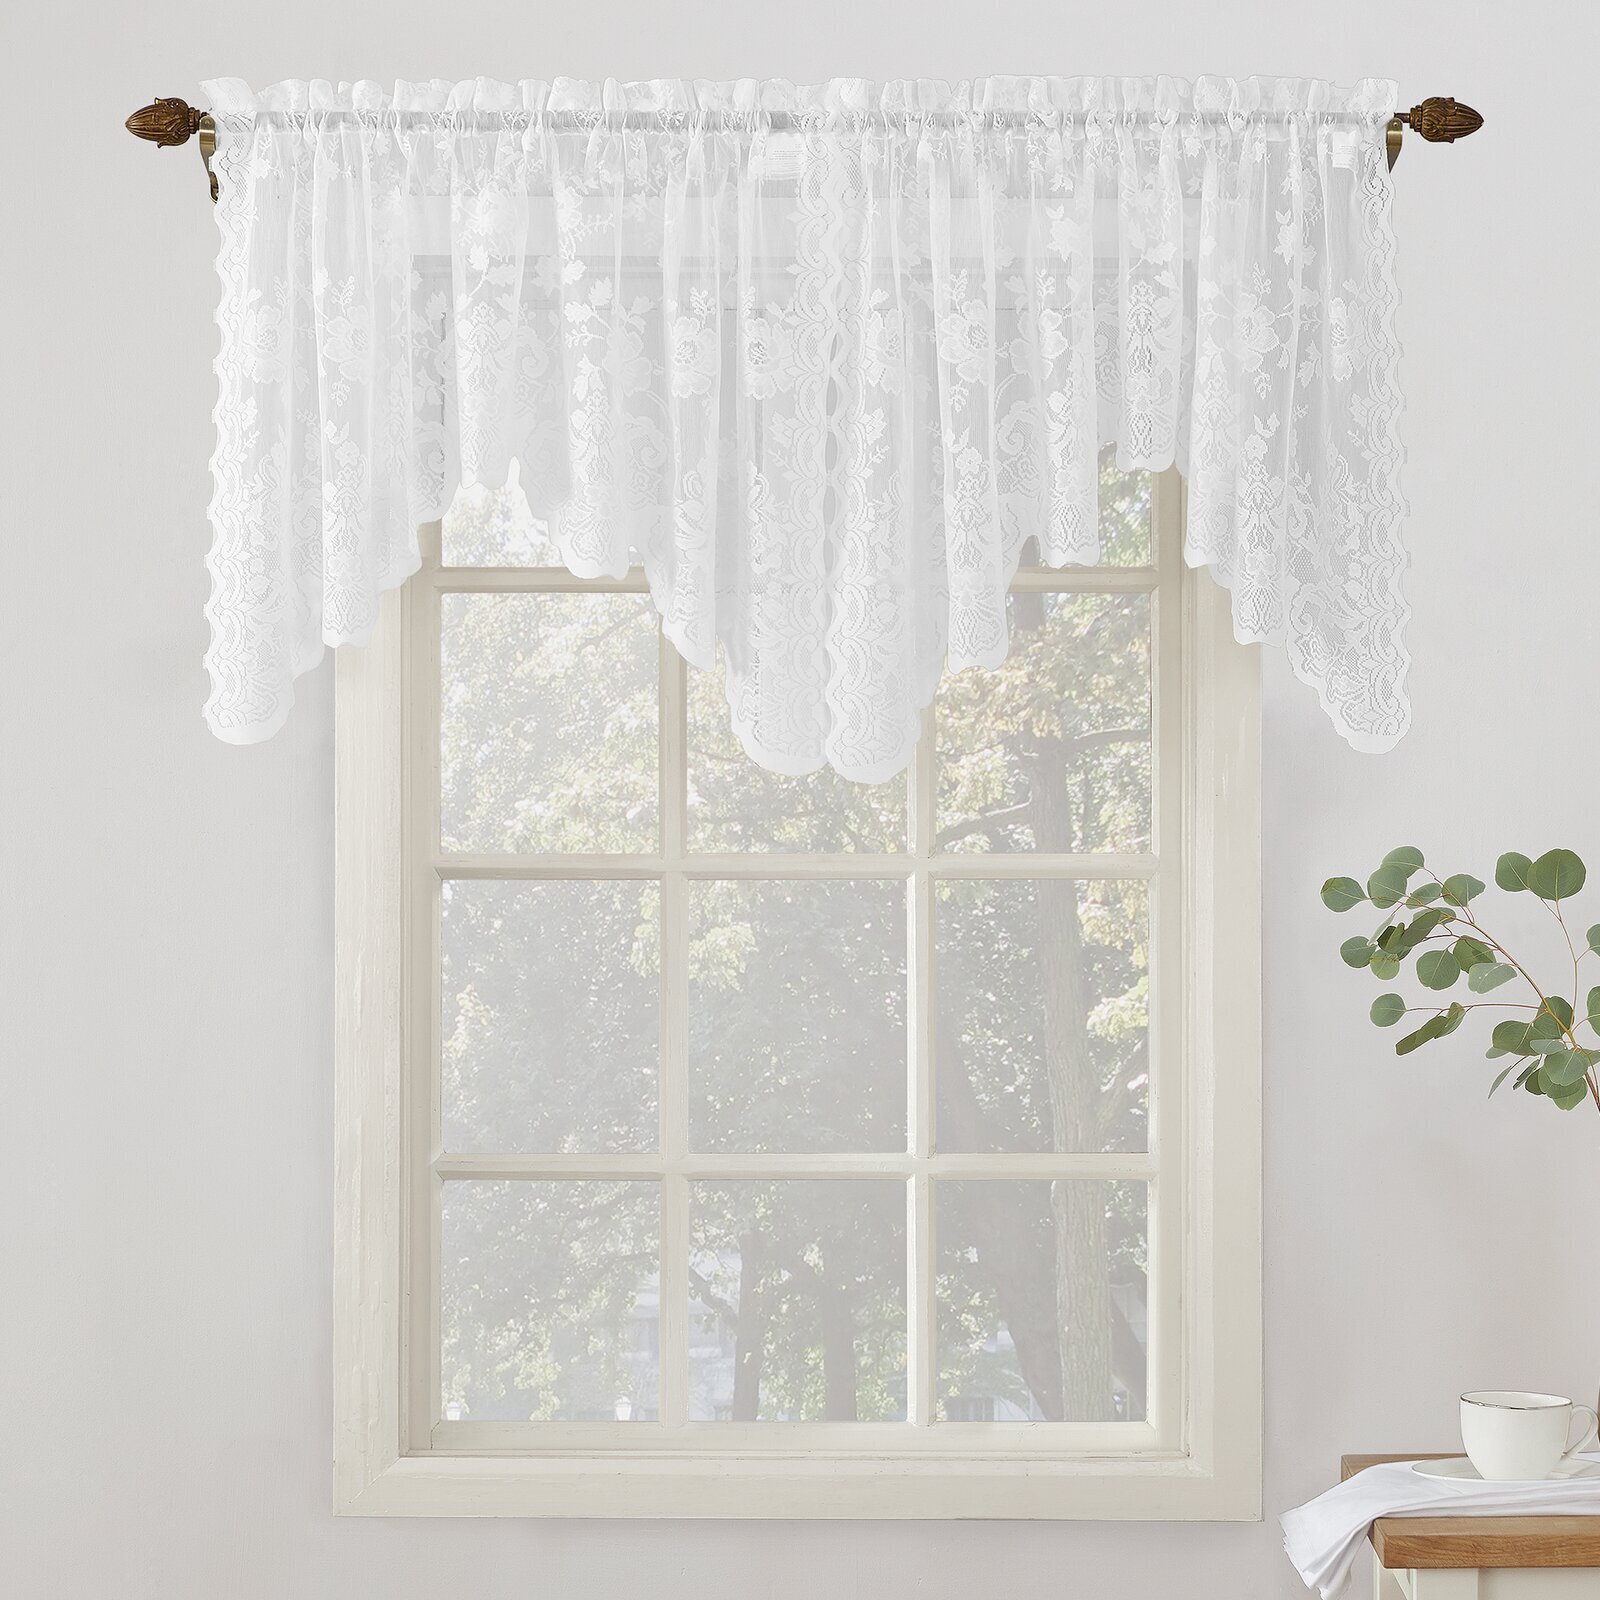 Sheer Valance Curtain for Kitchen